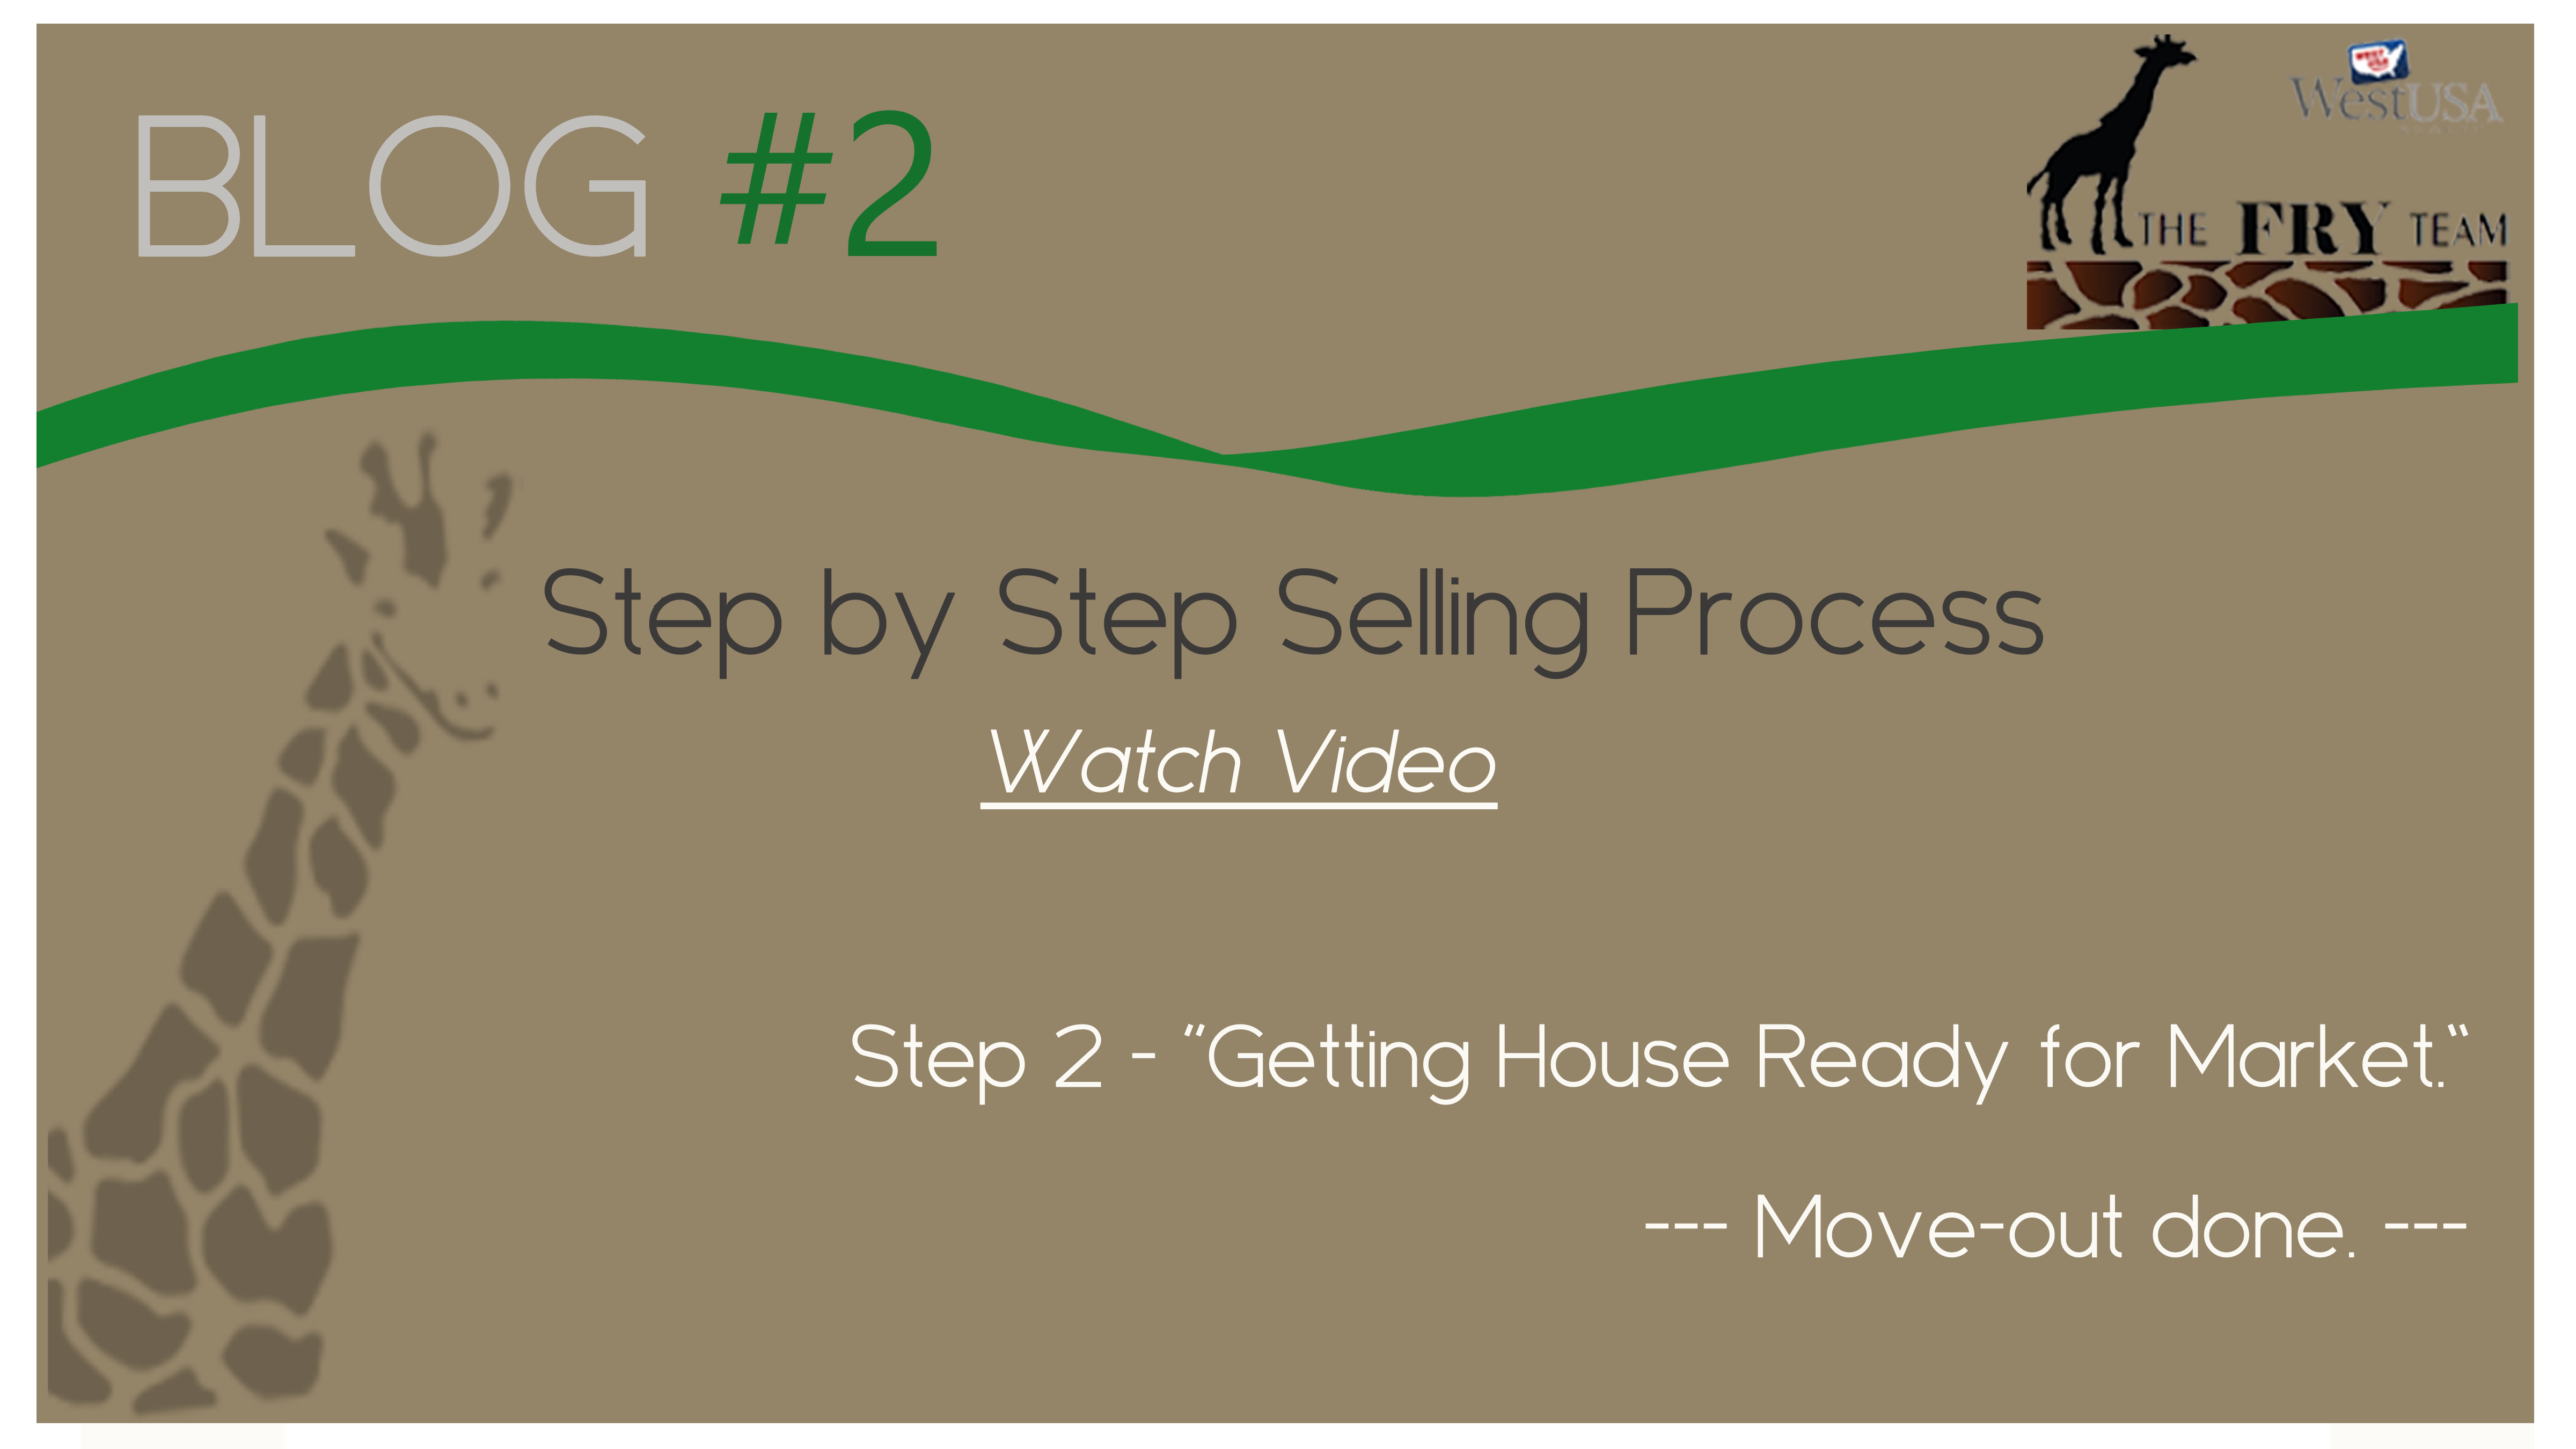 Step 2 – Getting House Ready for Market